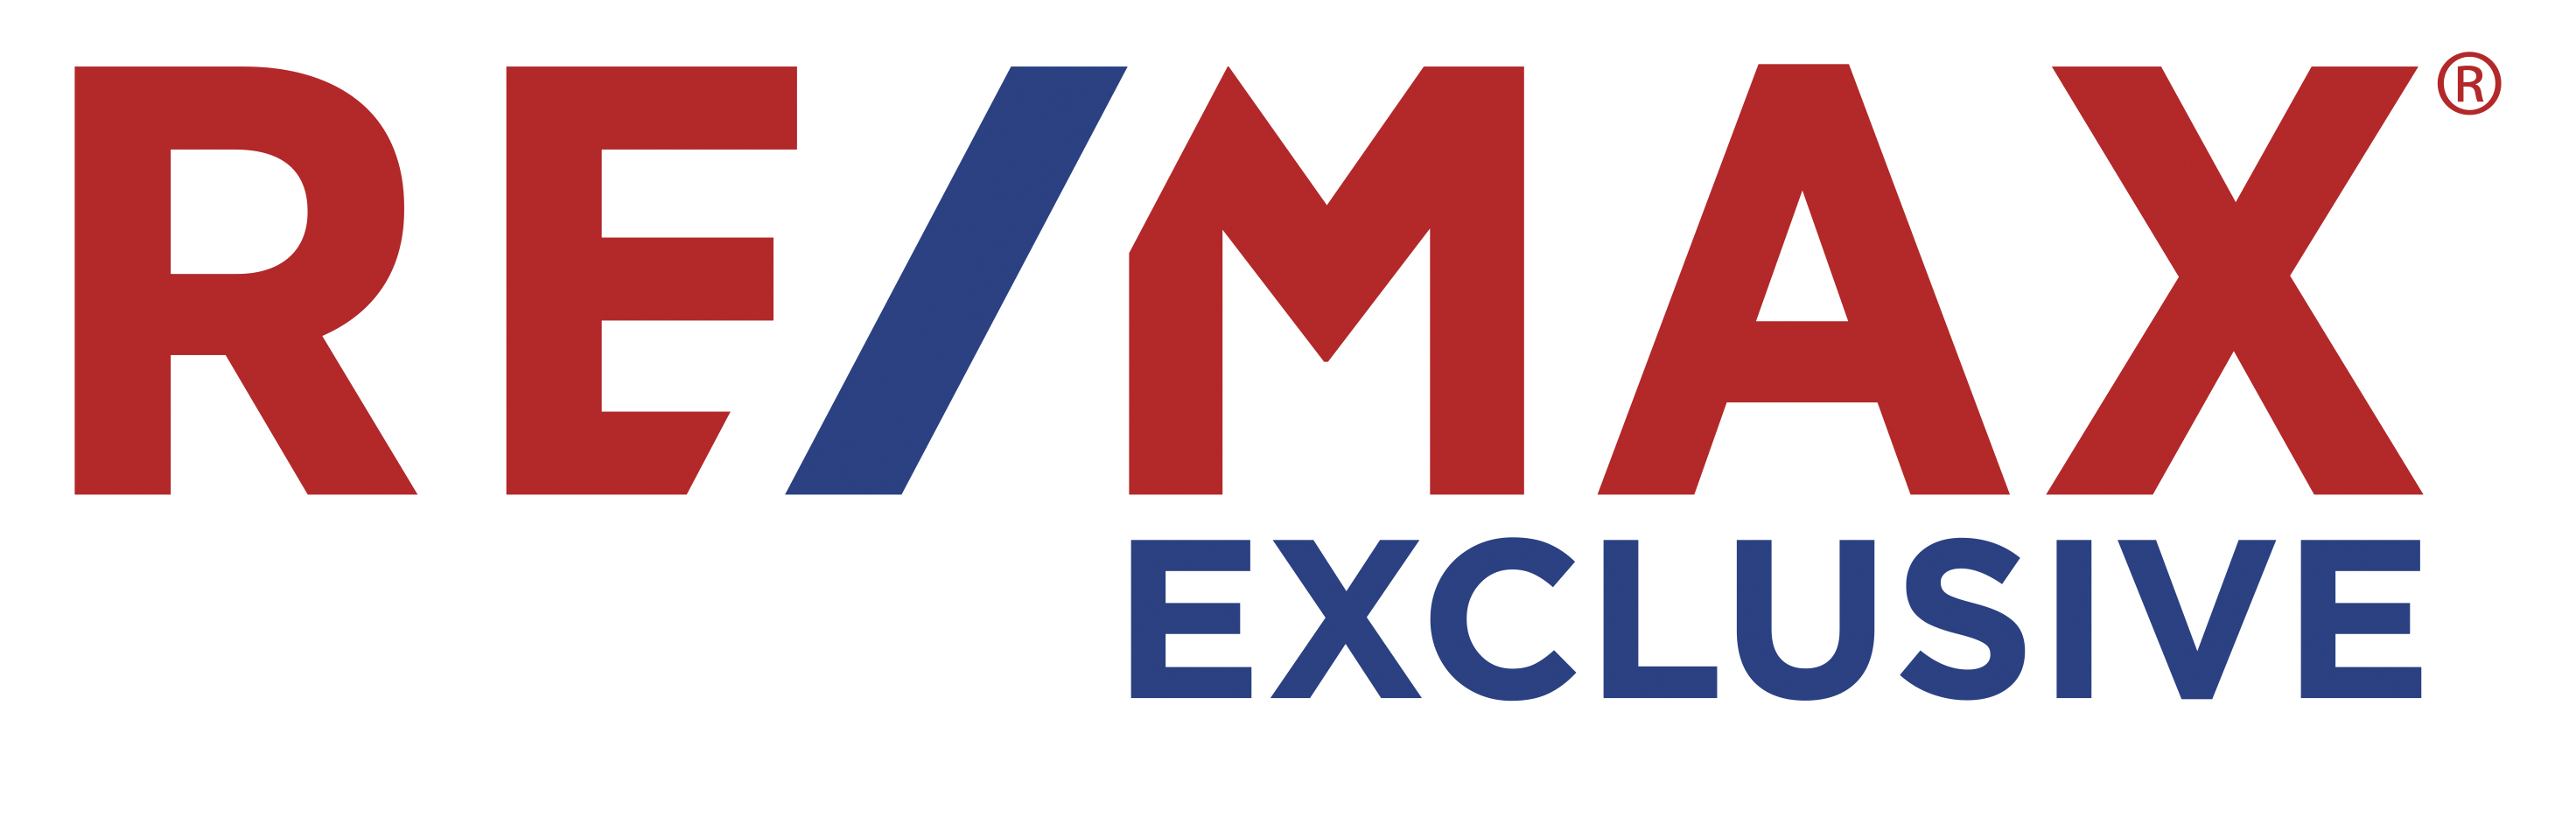 RE/MAX - EXCLUSIVE